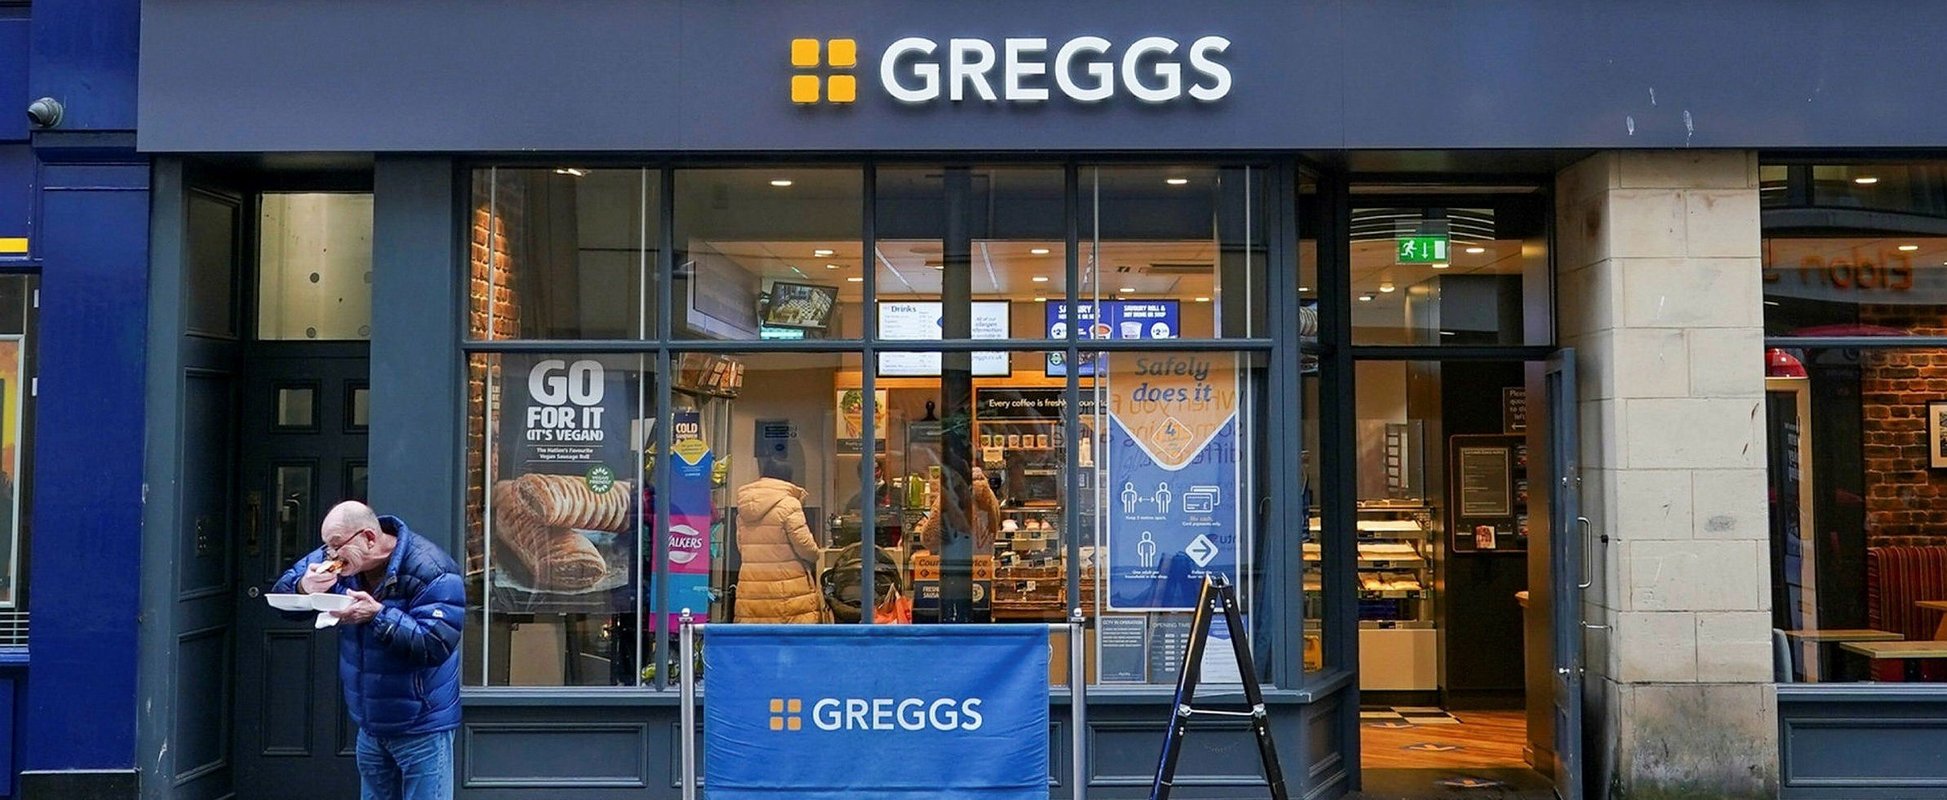 In front of the well-organized Greggs Bakery Store, a man is eating a Greggs' sandwich.